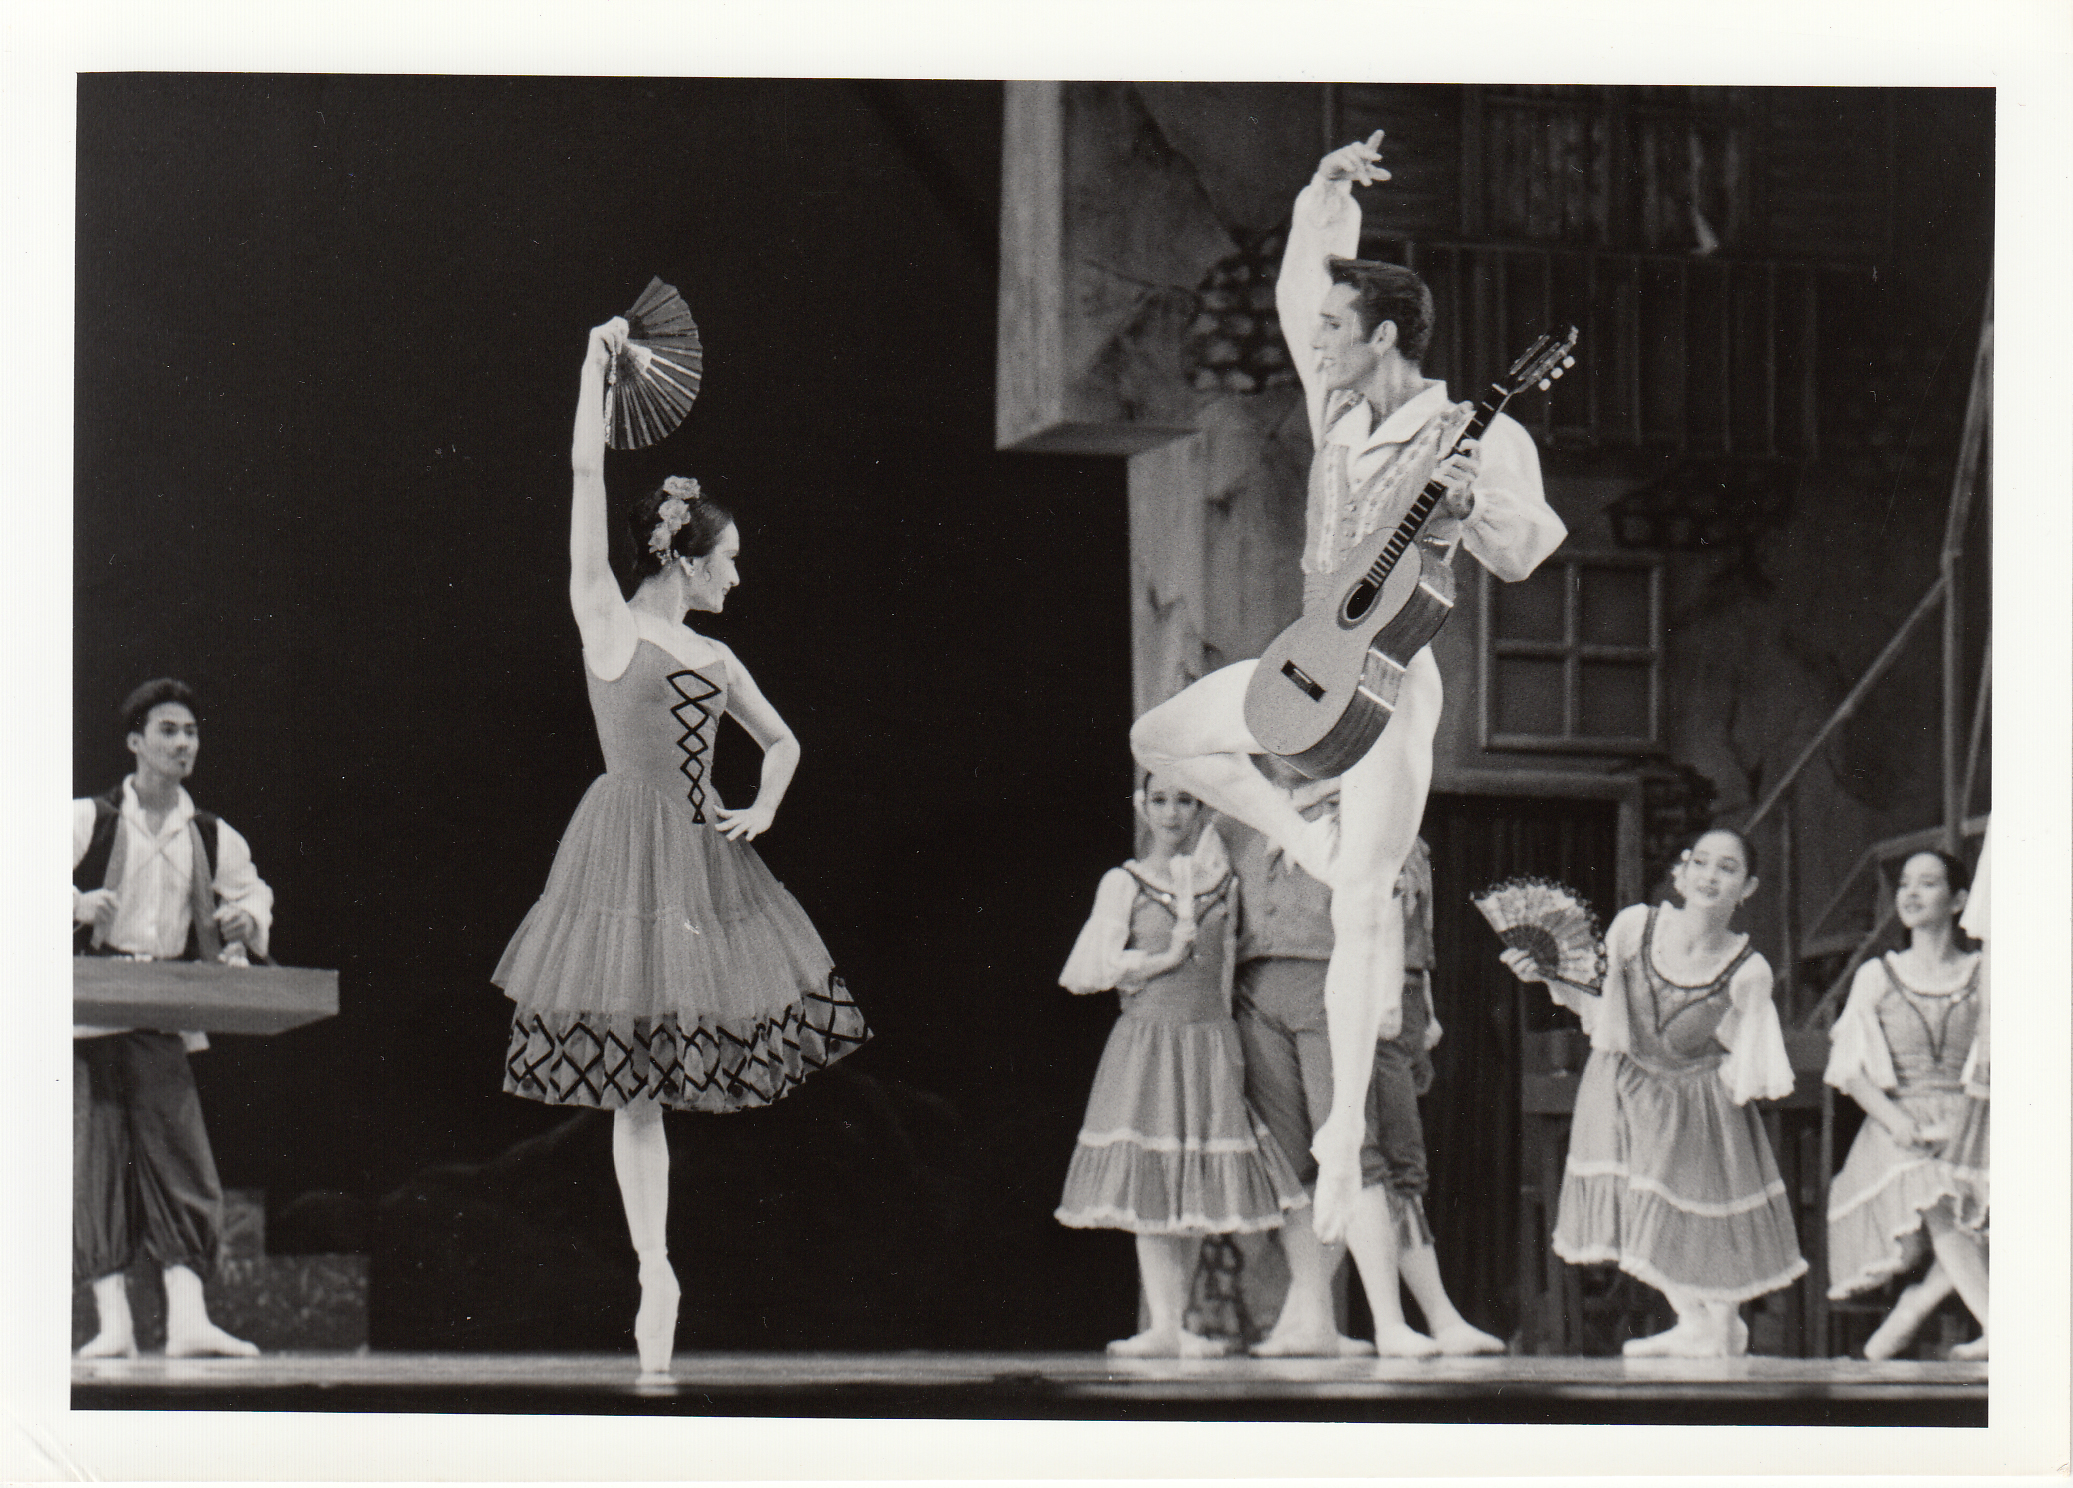 Don Quixote is marked by spirited dancing. Lisa Macuja as Kitri is partnered by American Ballet Theater’s Parrish Maynard as Basilio in this 1993 production.